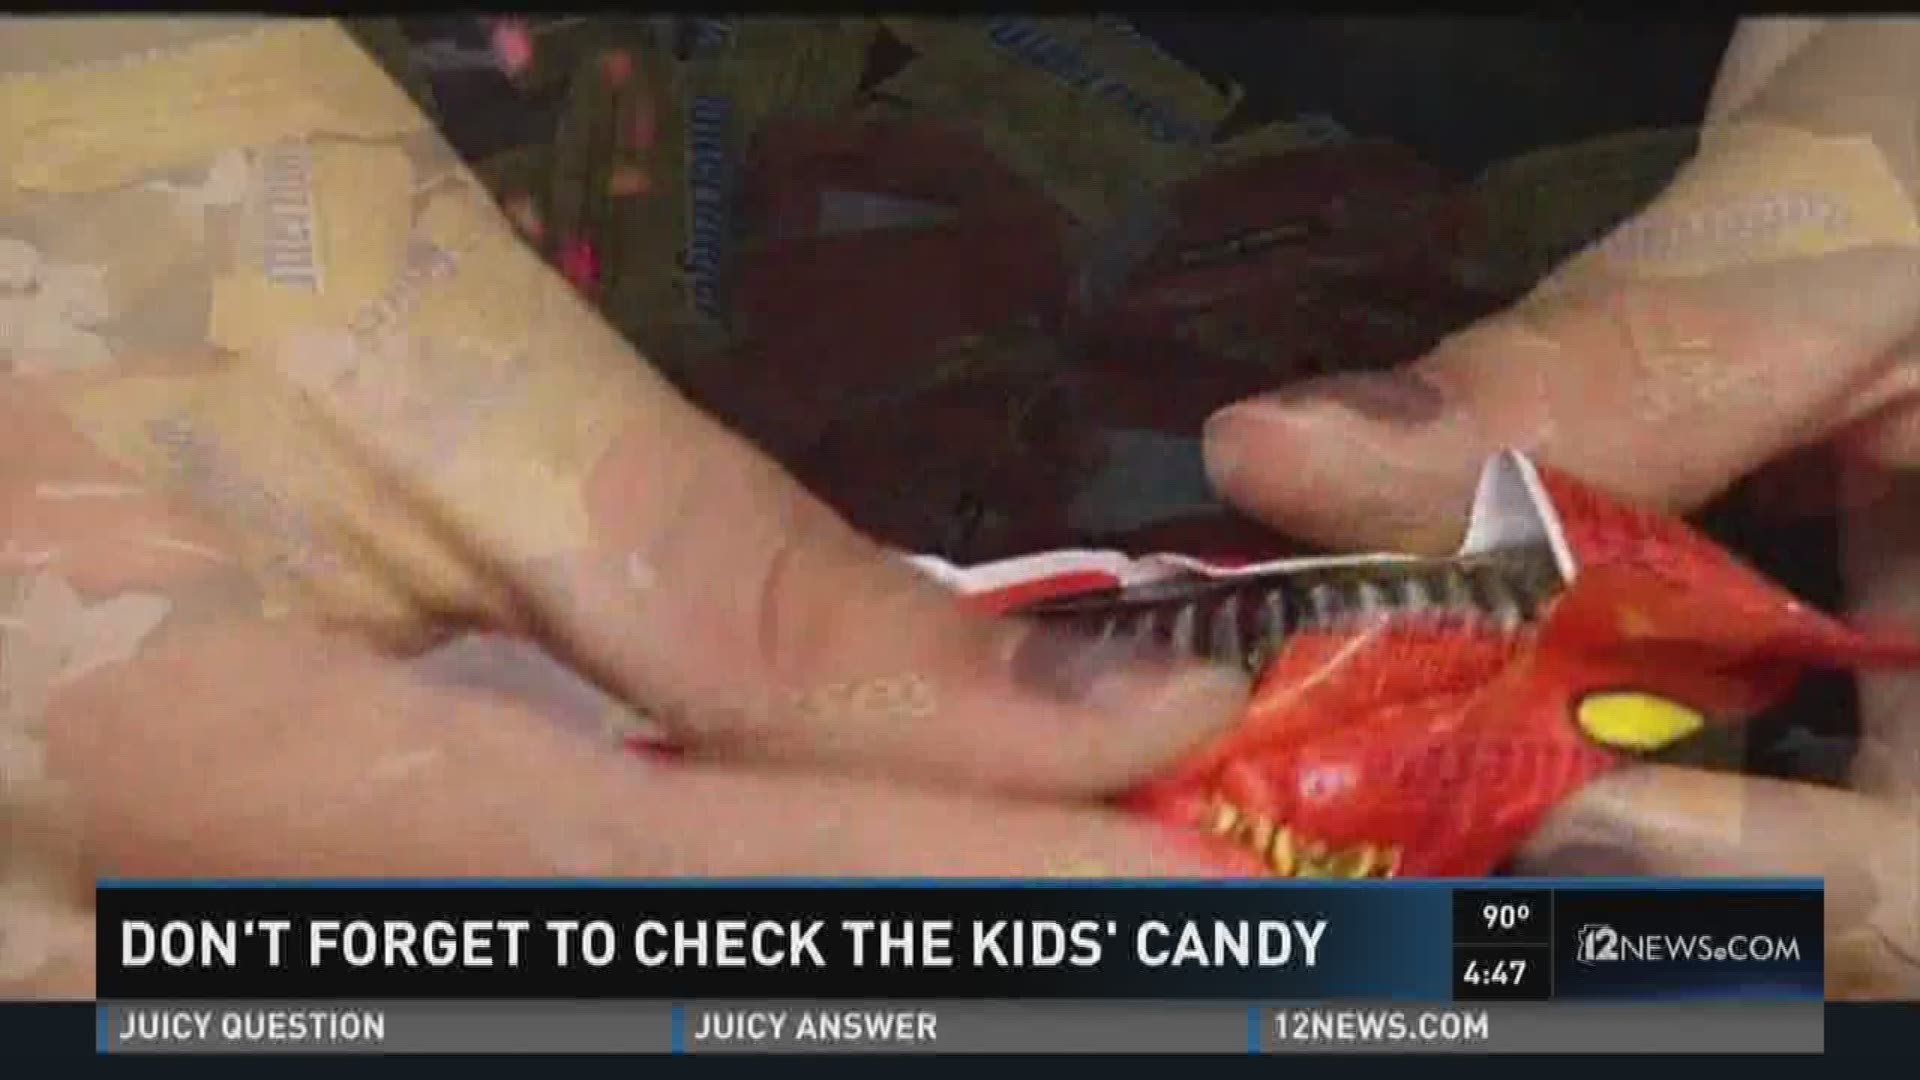 Halloween treats means parents have to be extra vigilant.